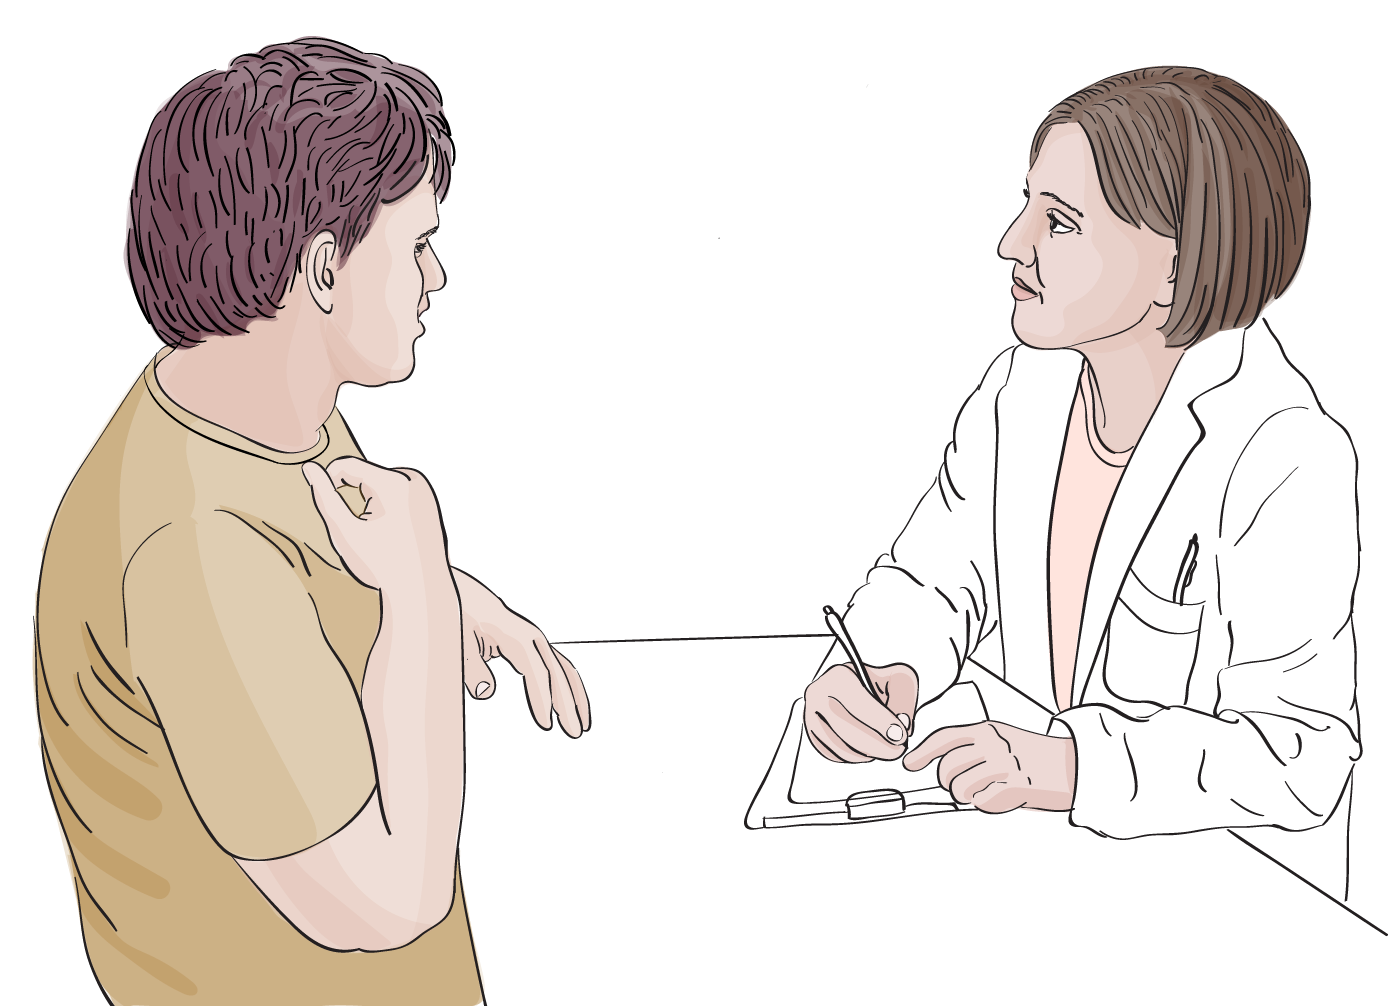 Image of a health care provider sitting next to a client and listening to what the client has to say while taking notes. Theya are both sitting at a table in the doctor's office